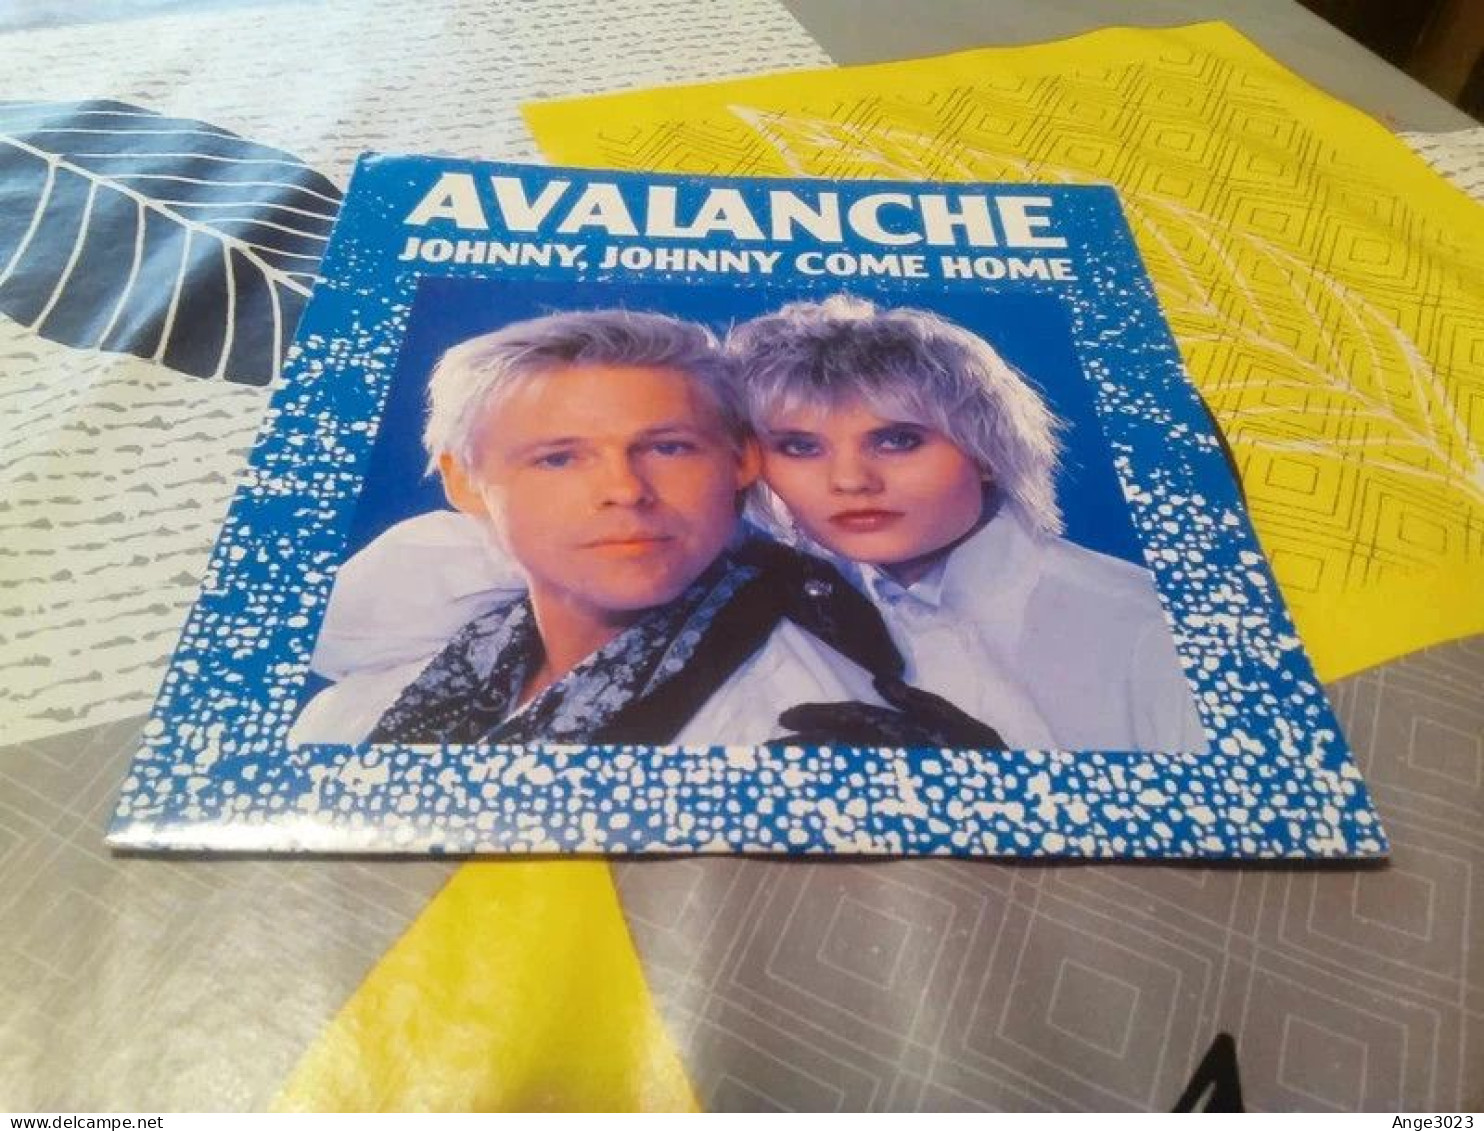 AVALANCHE "Johnny Johnny Come Home" - New Age